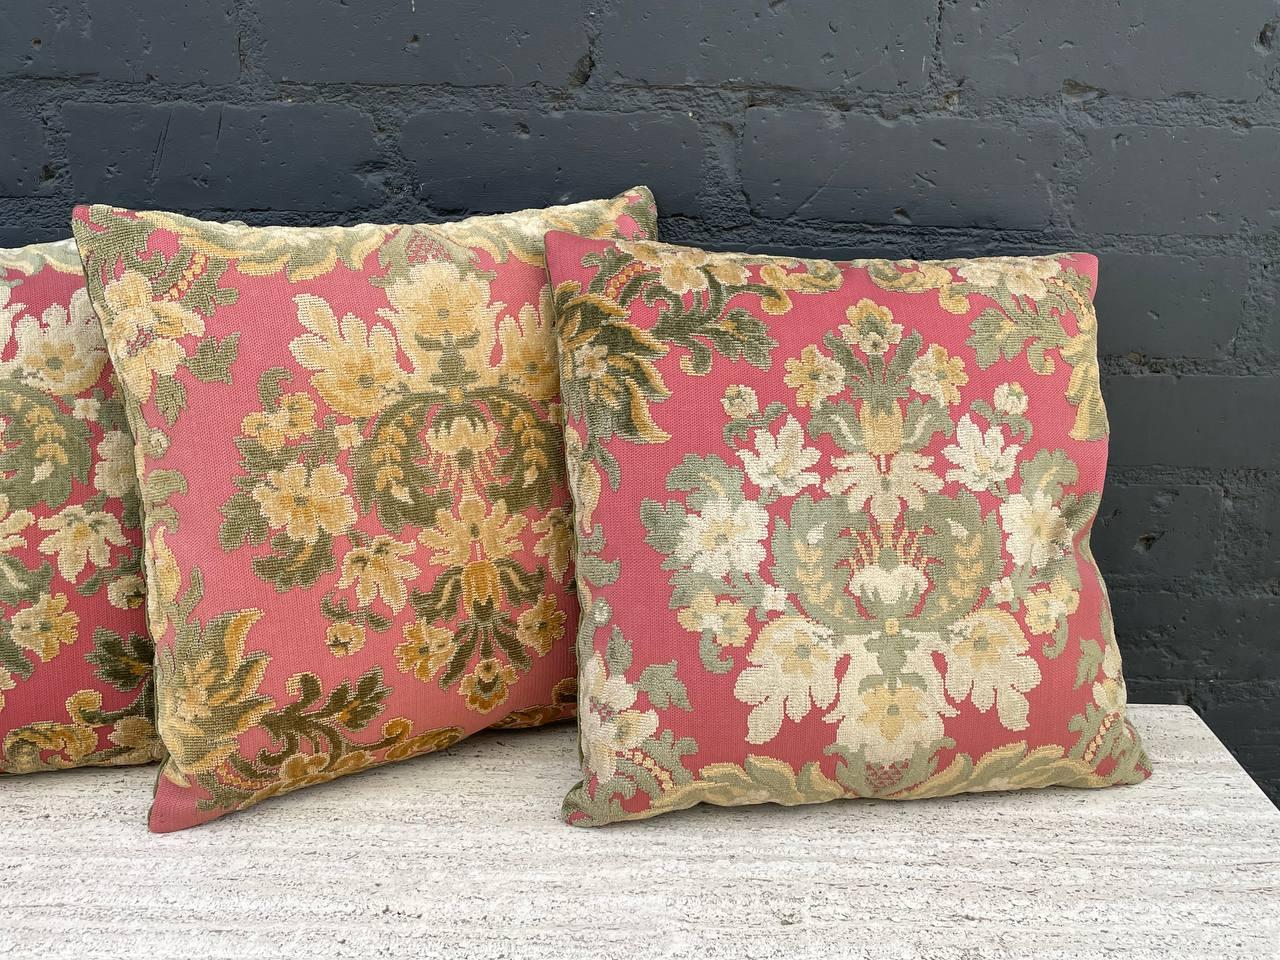 Designer: Unknwon
Country: Italy
Manufacturer: Unknown
Materials: Cotton, Linen
Style: Rococo
Year: 1950s

Vintage Antique Fortuny Decorative Textile Pillow Set 

$350 each.